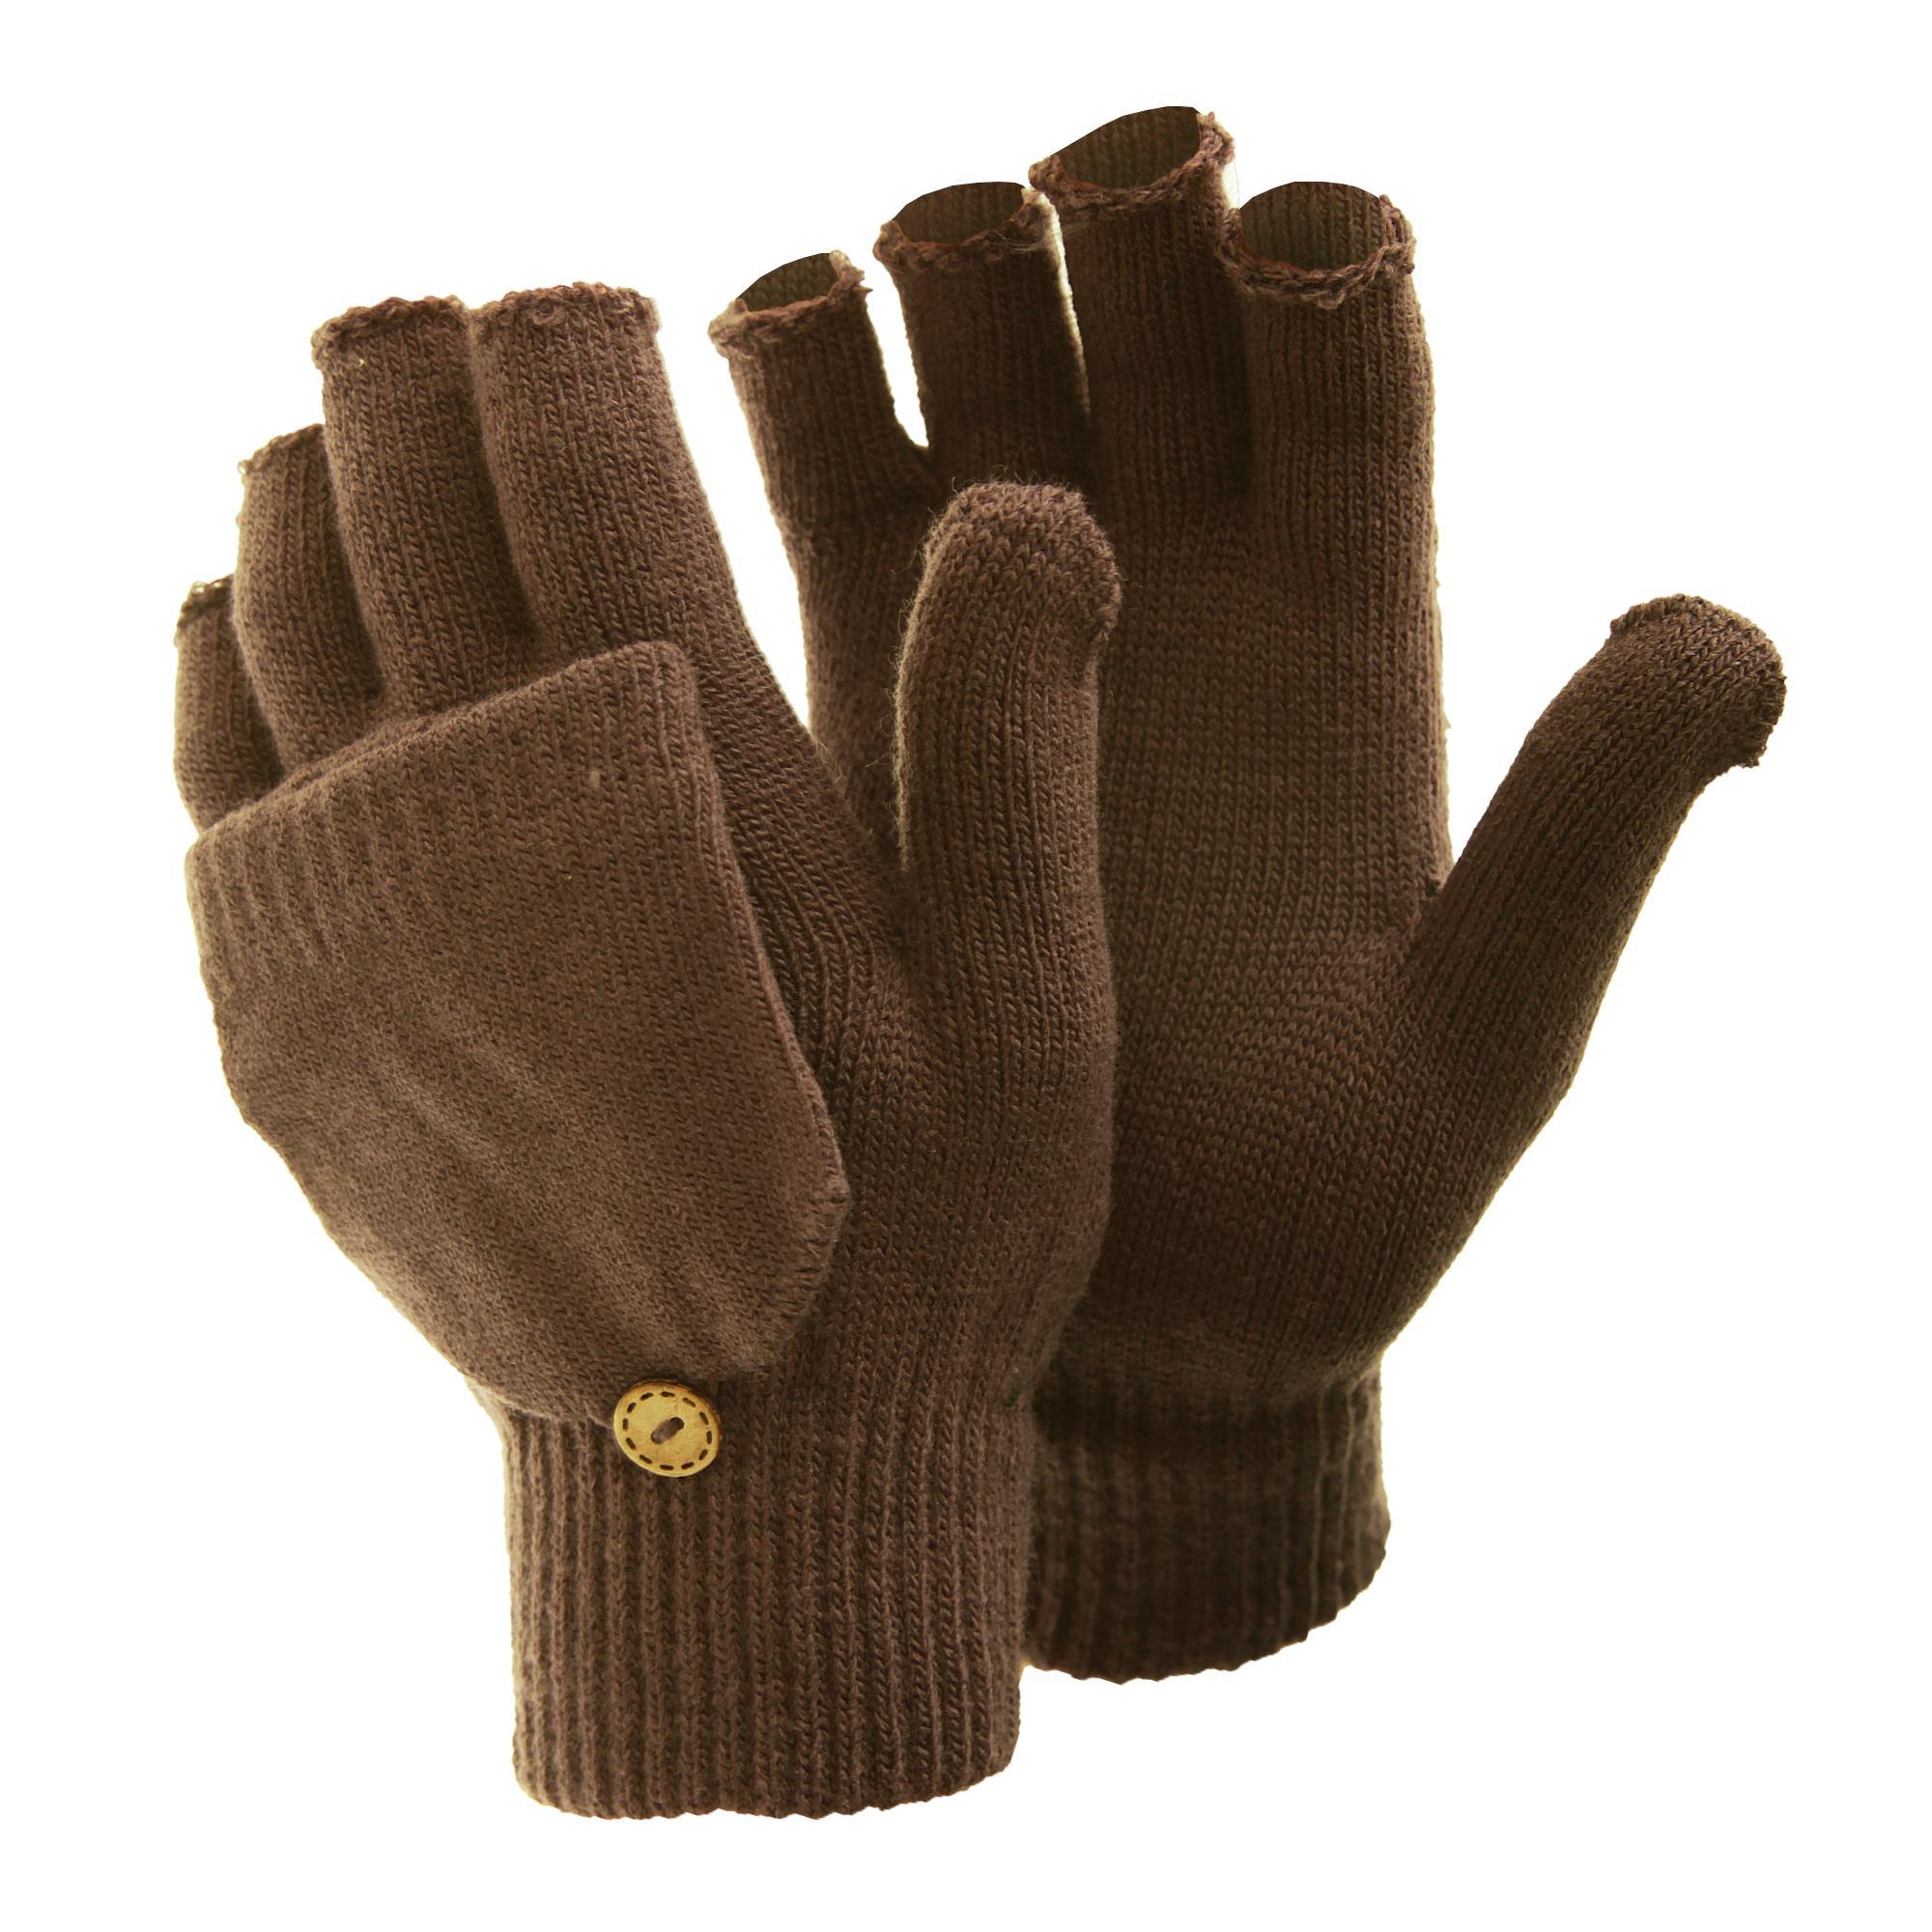 FLOSO Ladies/Womens Winter Capped Fingerless Magic Gloves (Brown) (One Size)